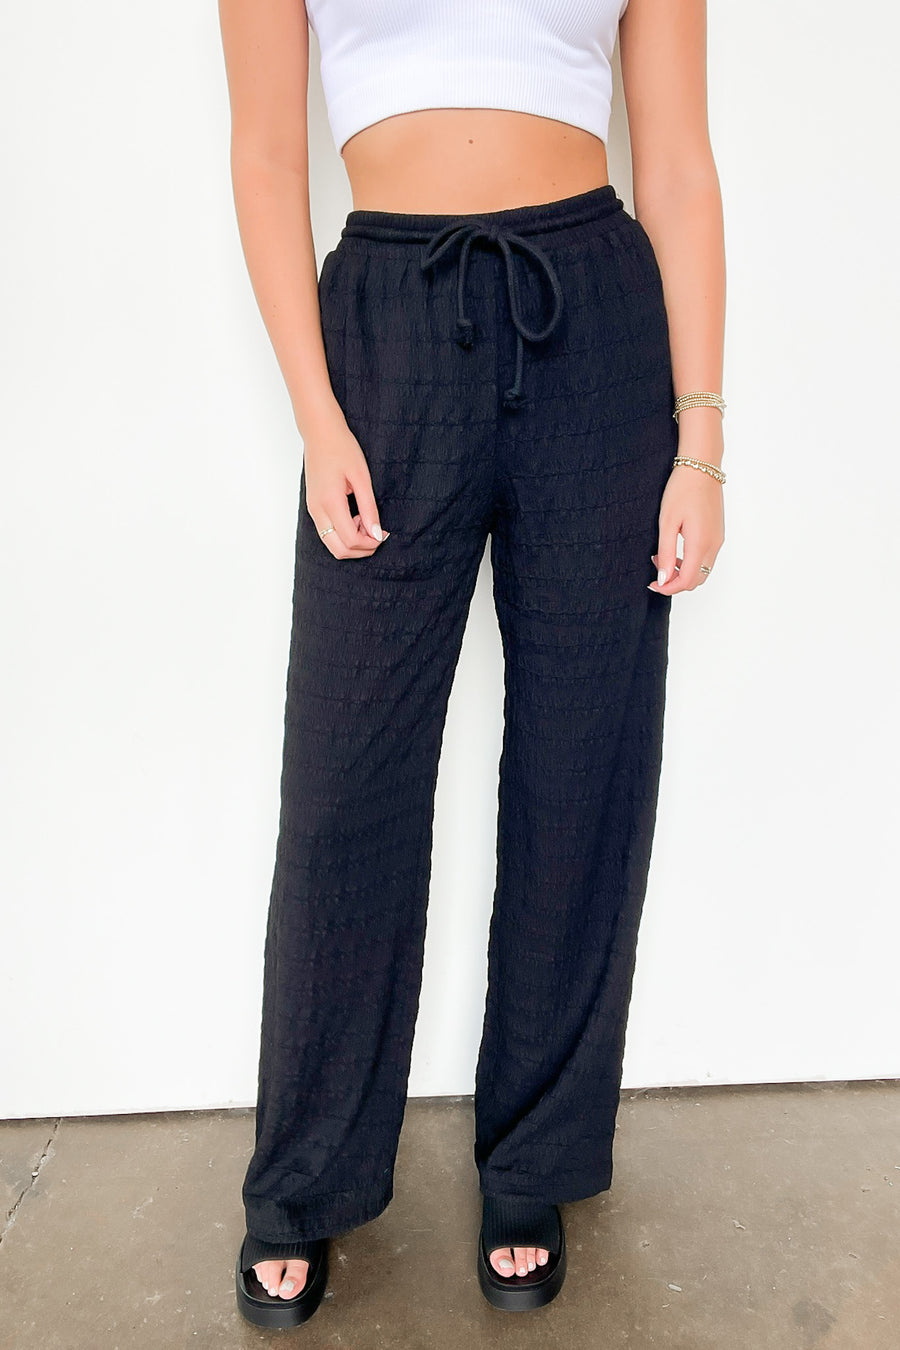  Delightful Approach High Waist Textured Knit Pants - Madison and Mallory